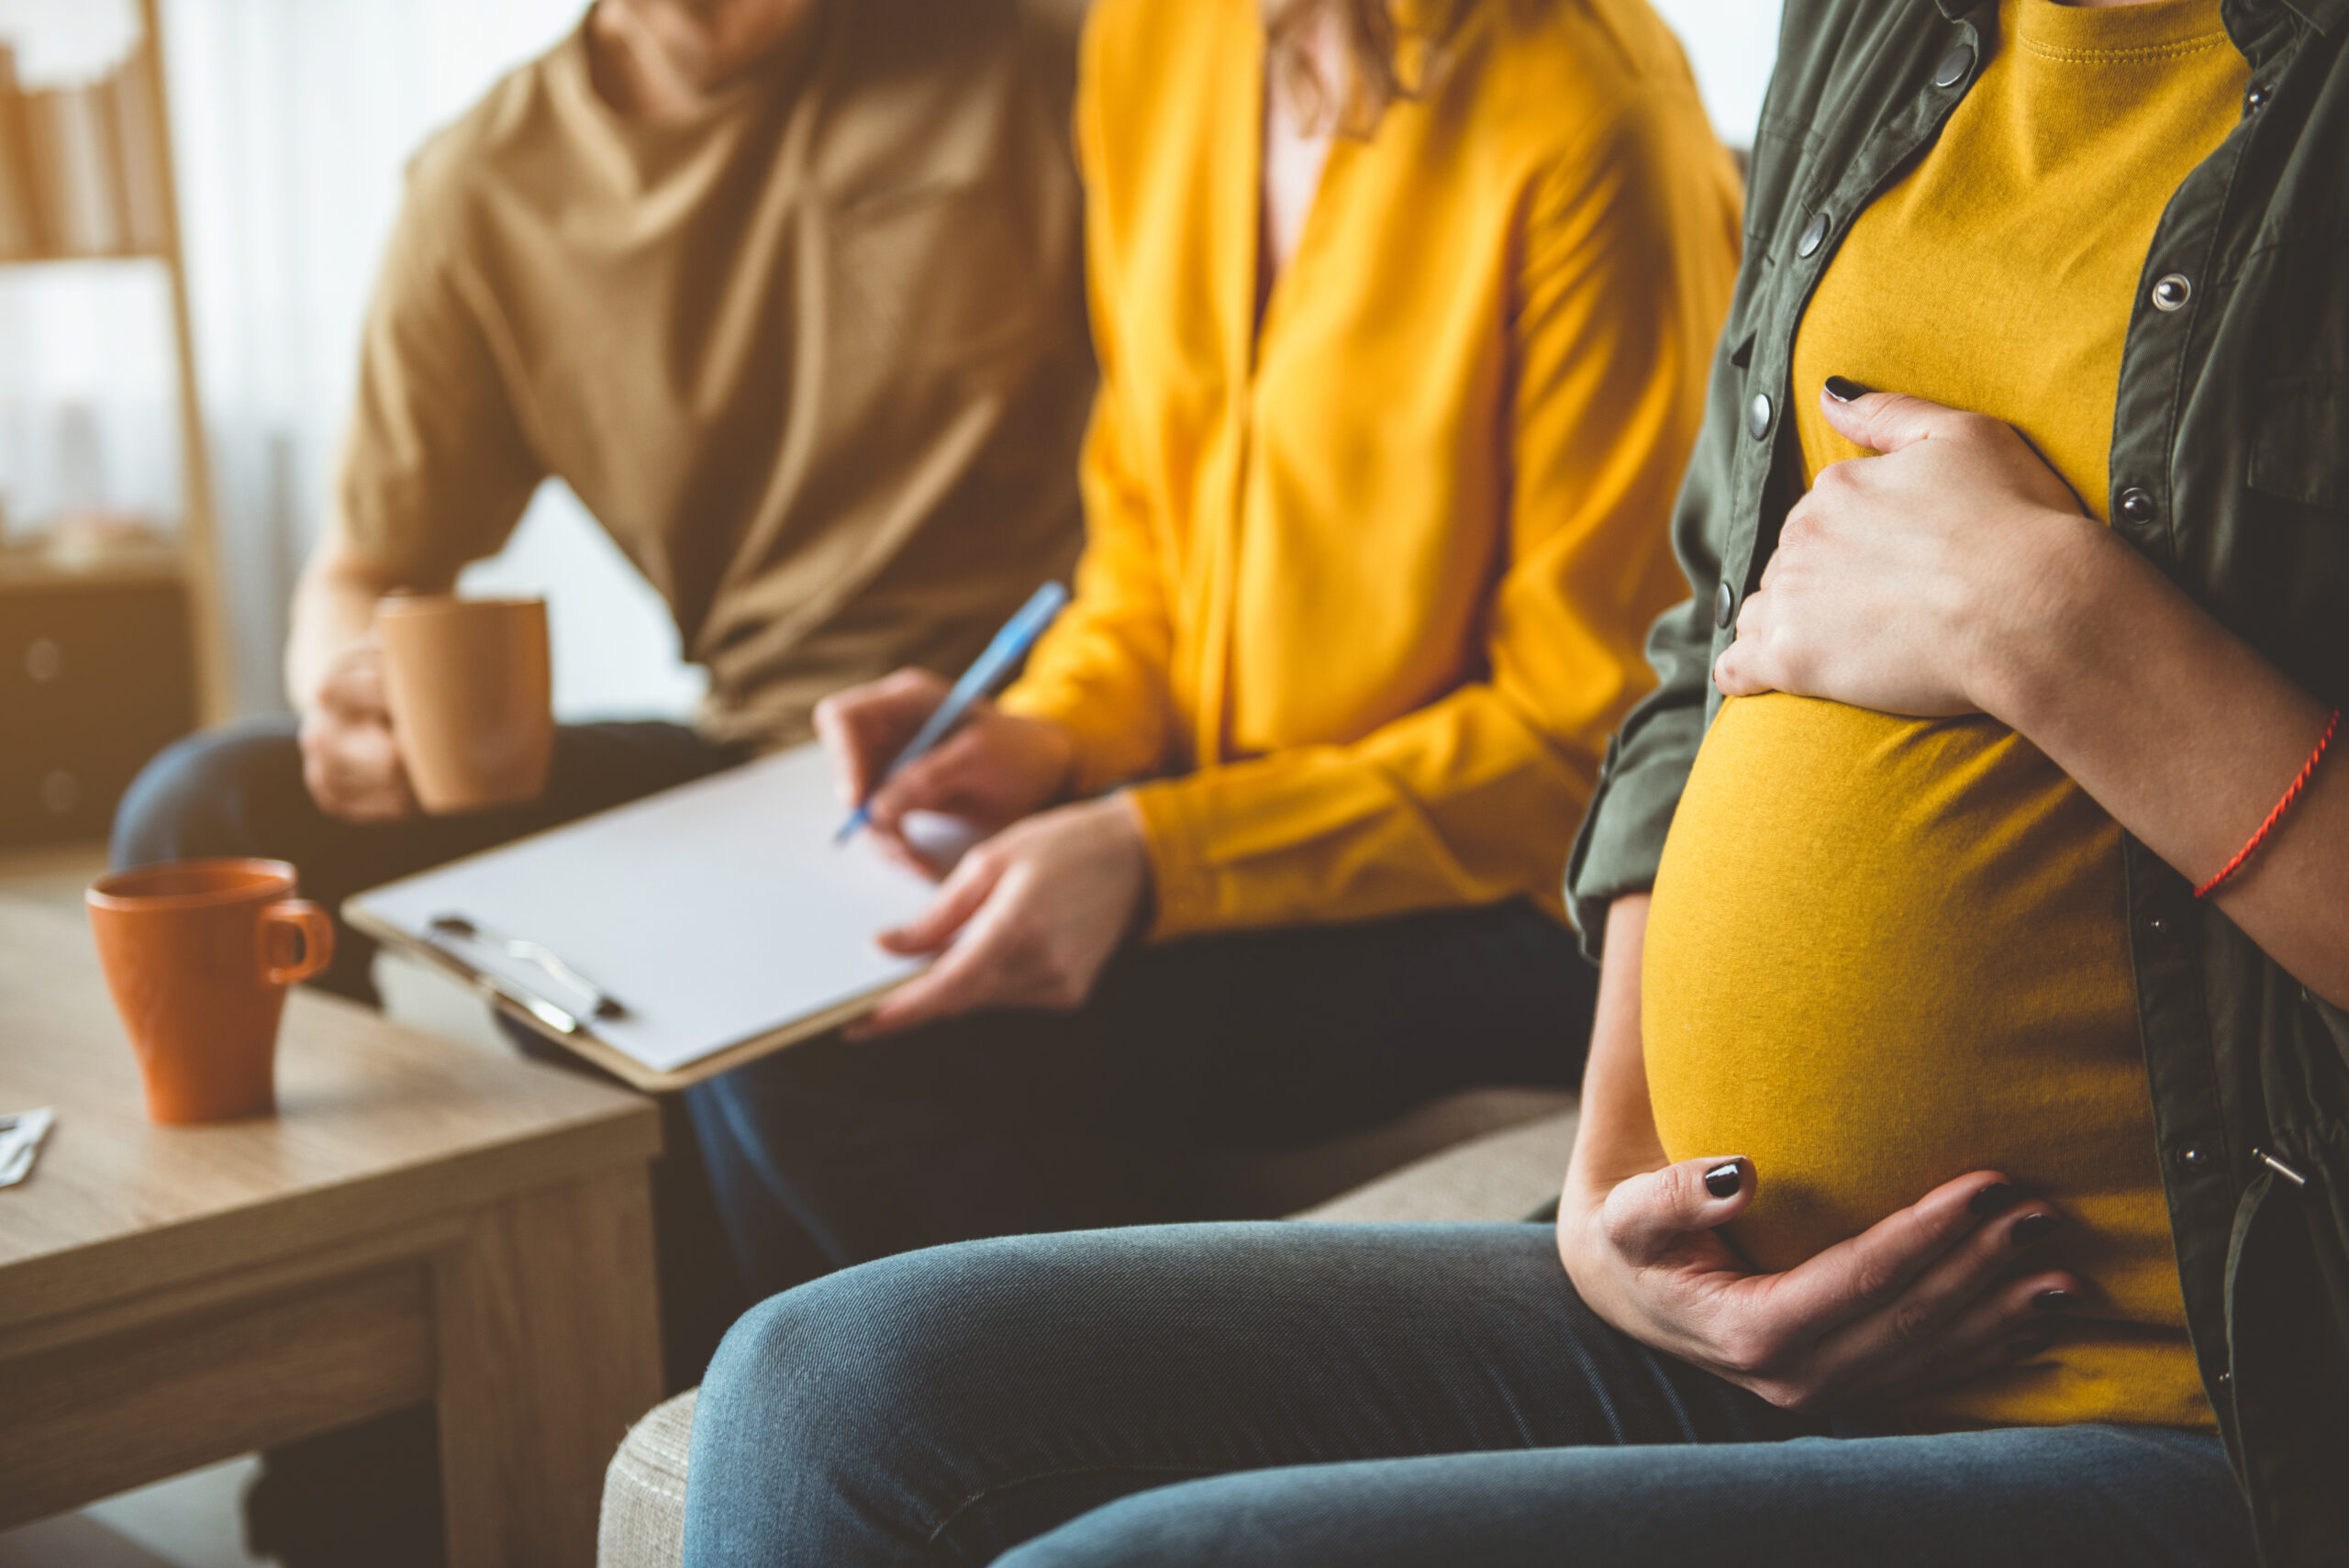 Focus on pregnant woman with hands on her abdomen. Married couple is putting signature on document while sitting on background. Surrogate motherhood concept